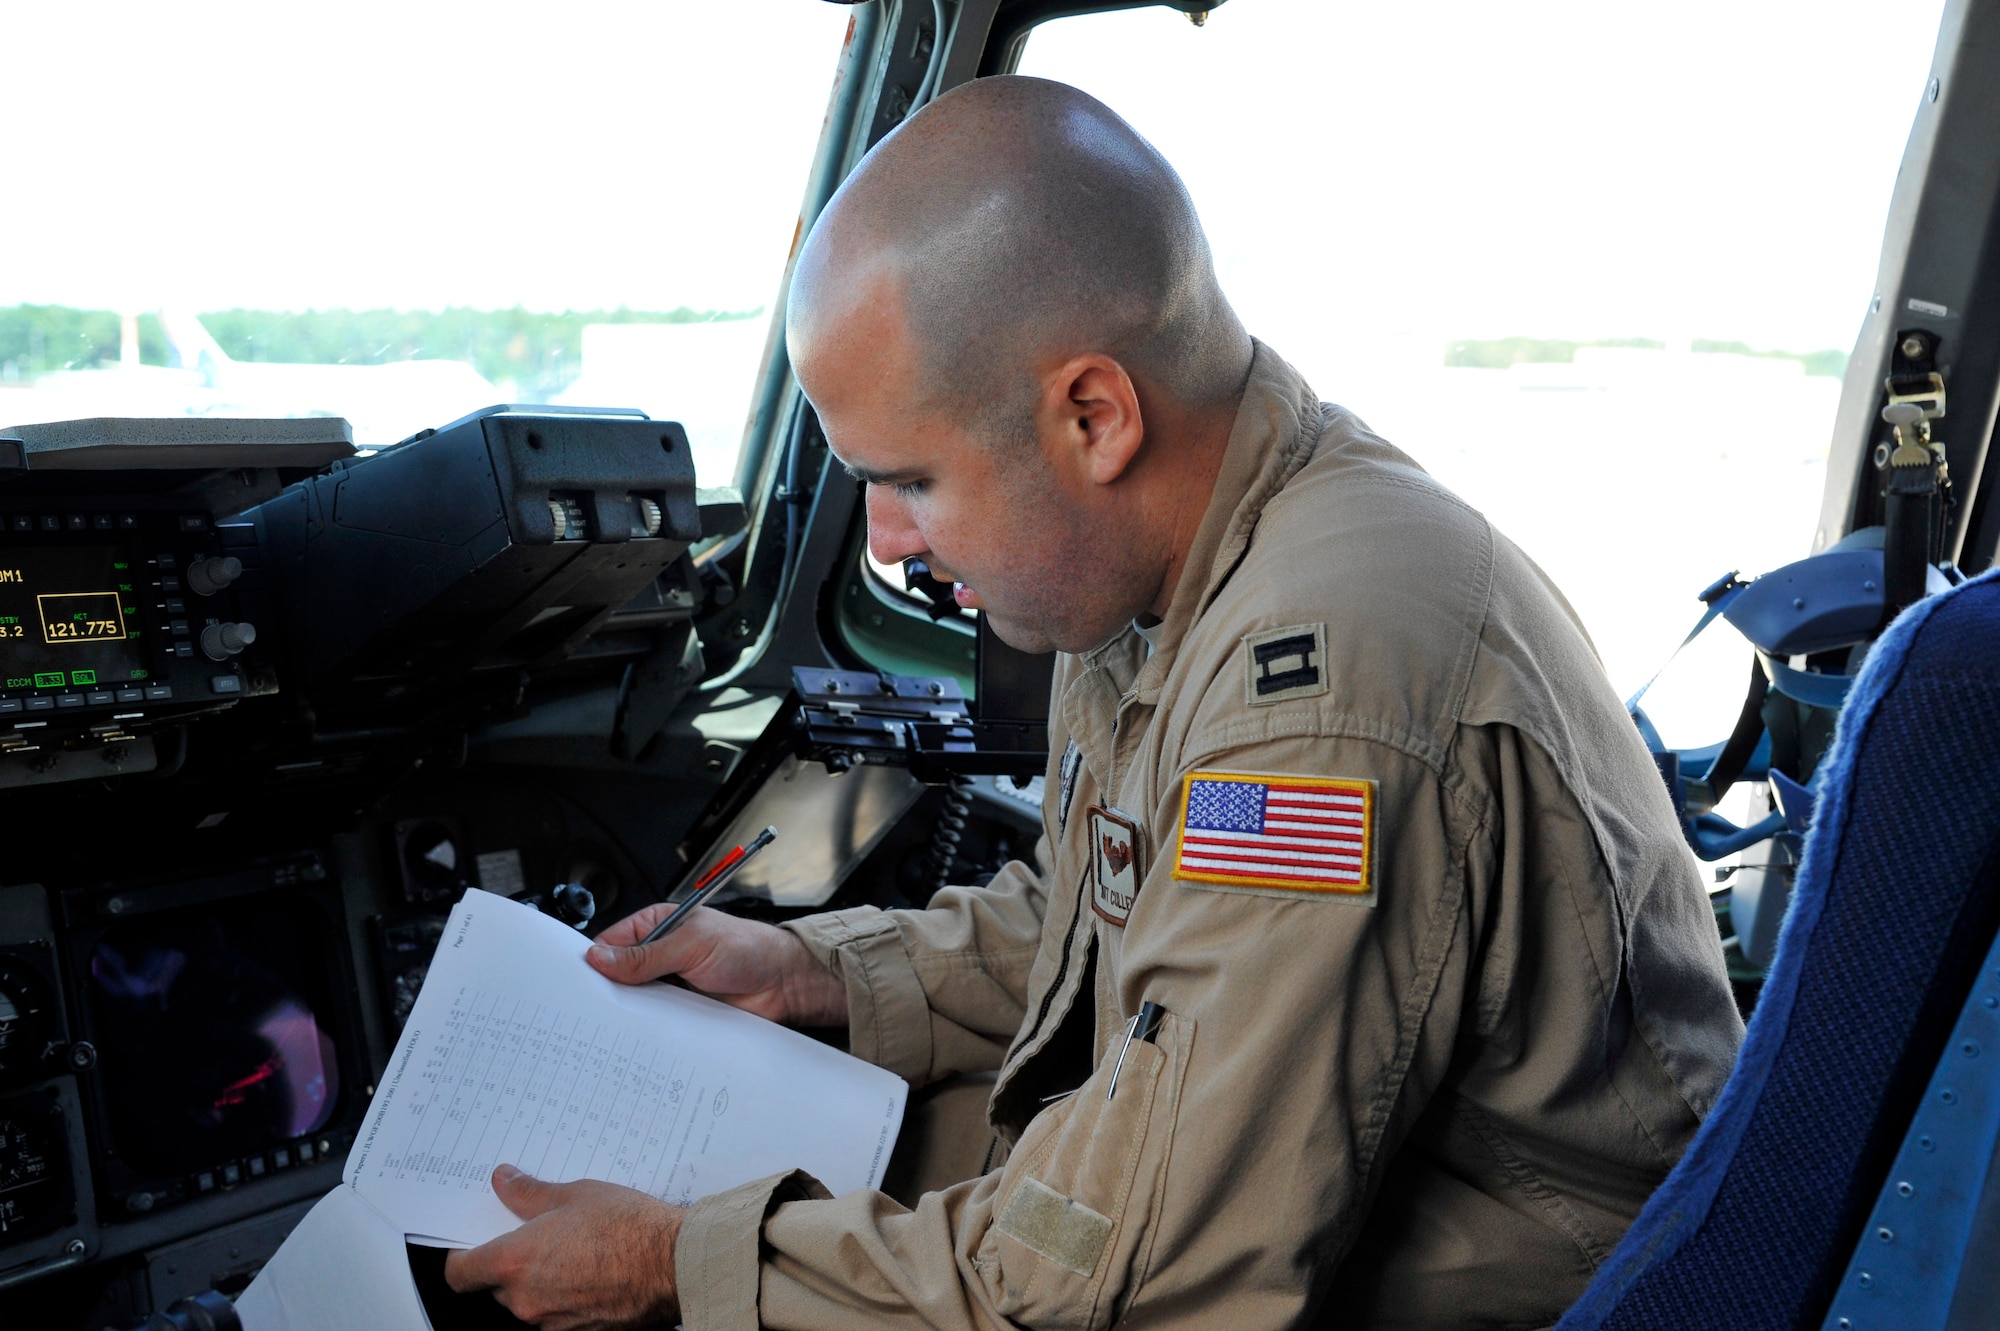 U.S. Air Force Capt. Matthew Cullen, 105th Airlift Wing C-17 Globemaster III mobility pilot, conducts a pre-flight checklist before take-off during a patient move on Ramstein Air Base, Germany, July 13, 2017. 105th AW Airmen stationed at Stewart Air National Guard Base, New York, were part of the flight crew who transported the injured service members back to the United States. (U.S. Air Force photo by Airman 1st Class D. Blake Browning)